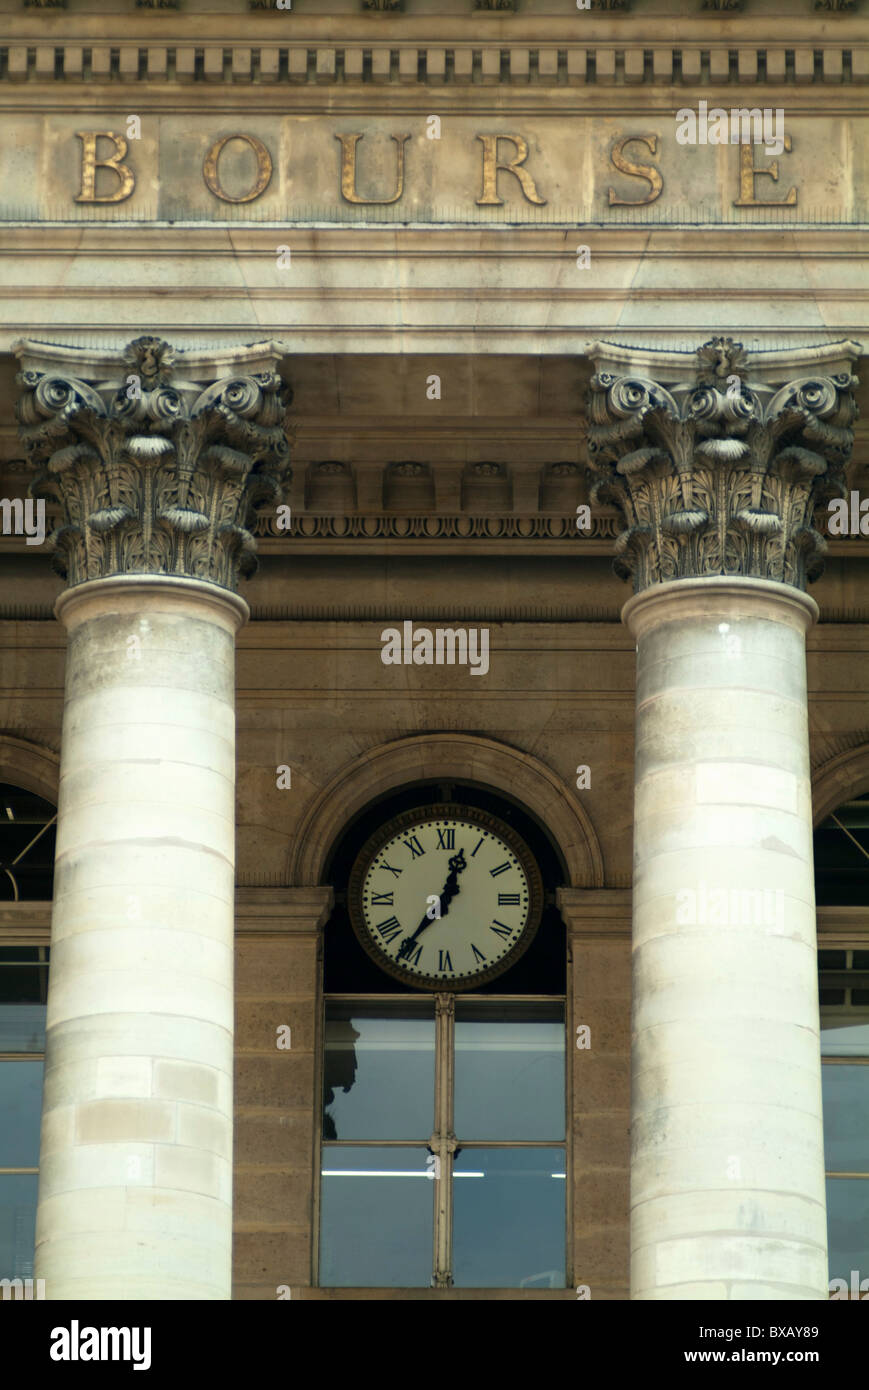 Windows and ornate columns on the outside of Paris Bourse (Stock Exchange Building), Paris, France. Stock Photo